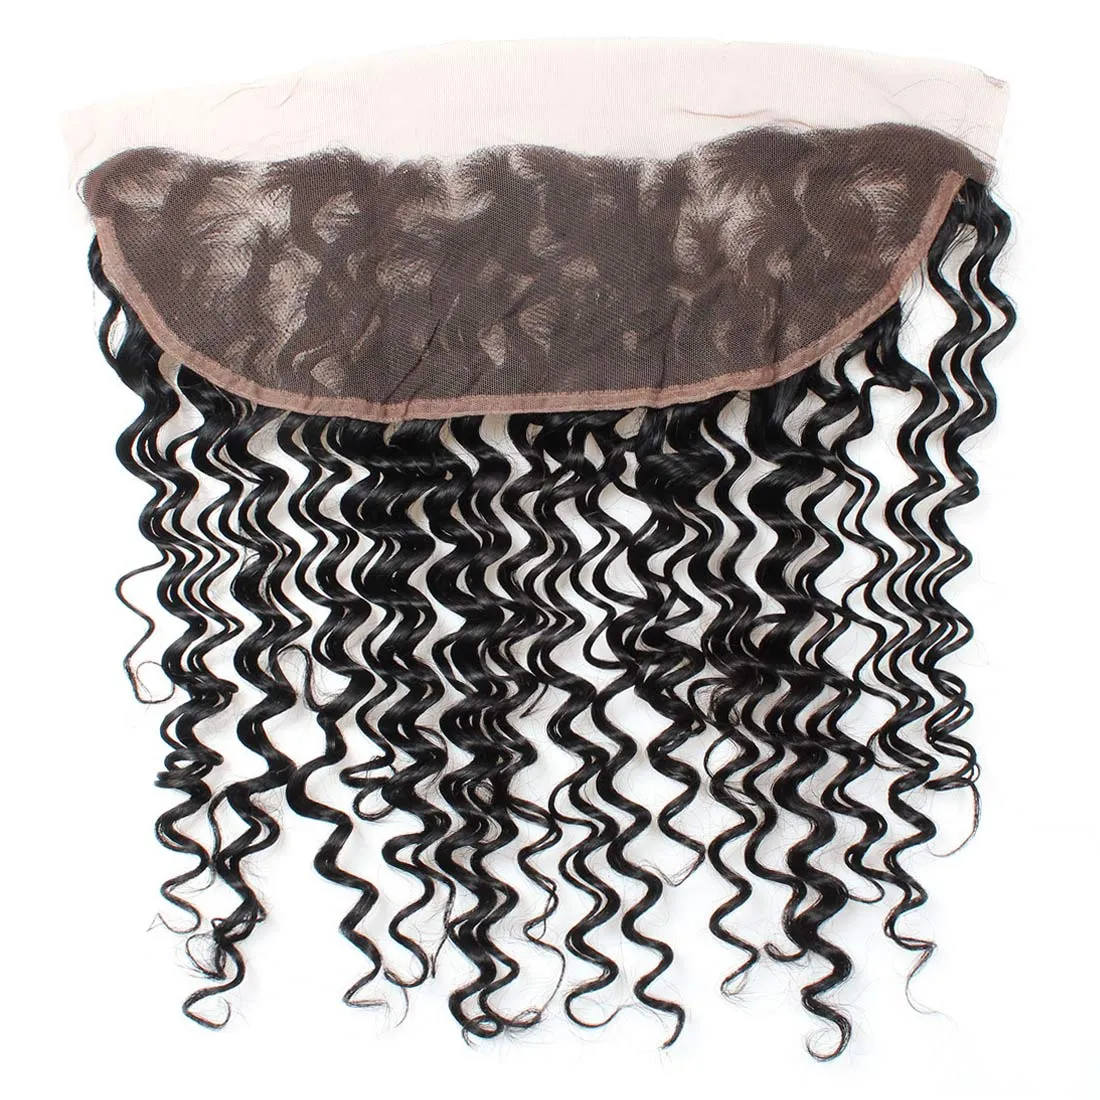 Whole Cheap 8A Brazilian Straight Hair Body Loose Water Deep Curly Wave Ear to Ear 1325 Lace Frontal Part 820inch 5974322